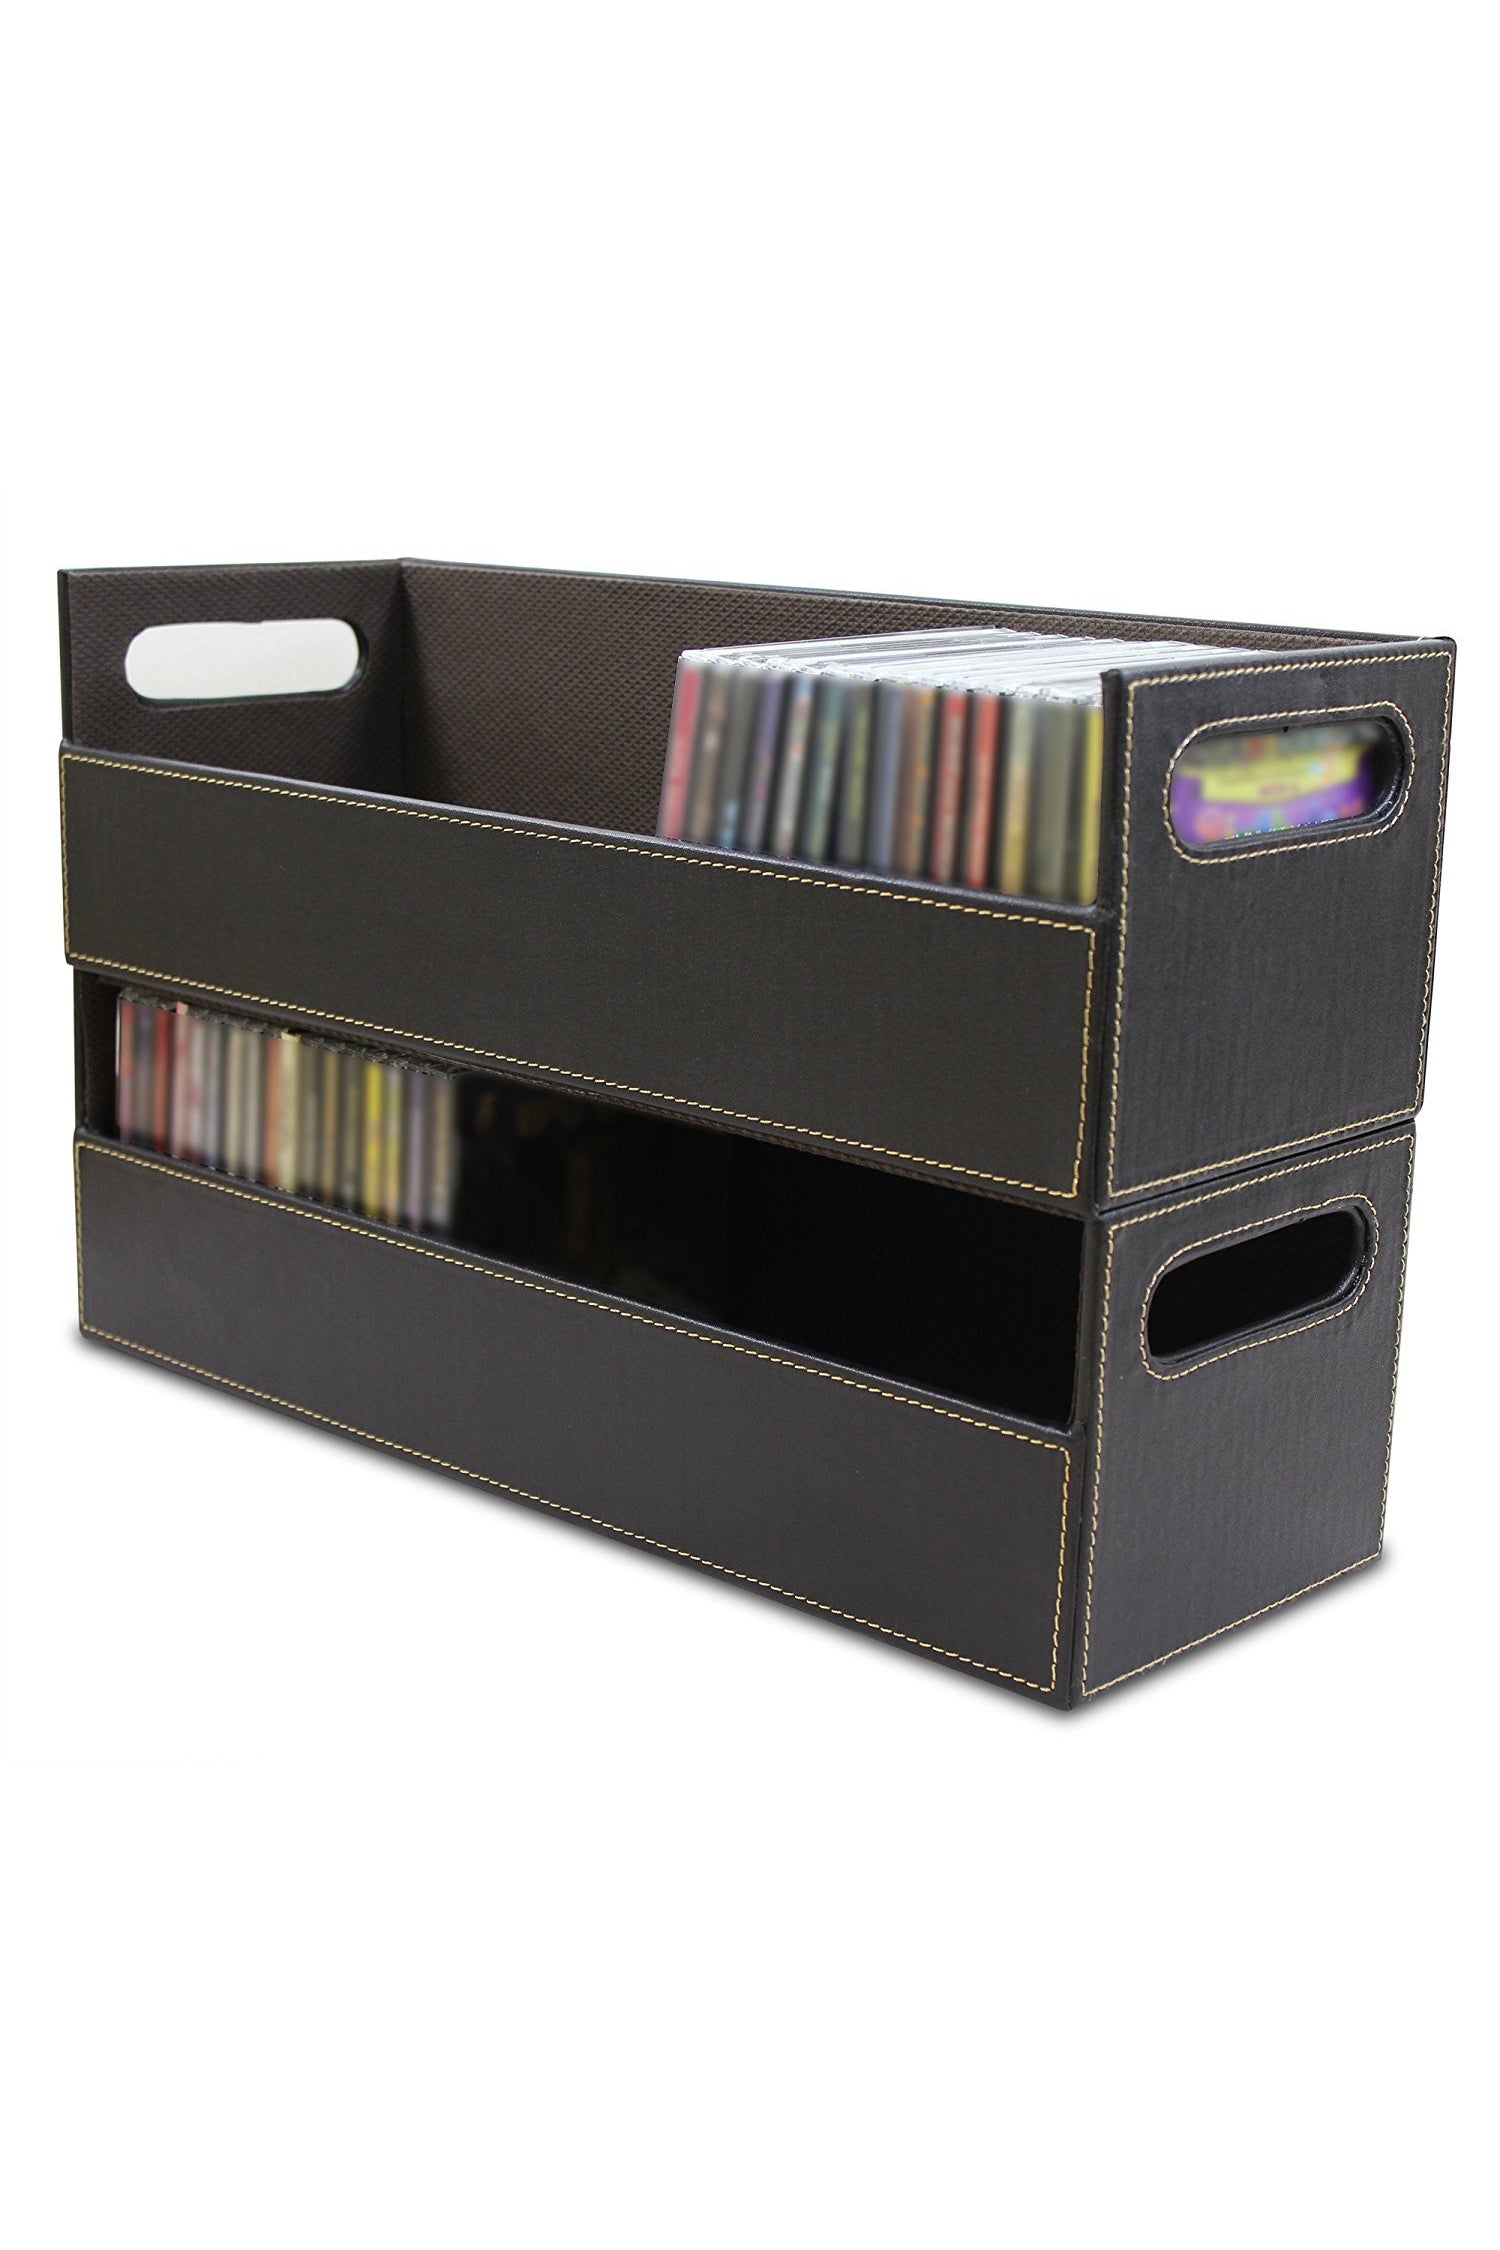 Set of 2- Stock Your Home CD Storage Box with Powerful Magnetic Openin